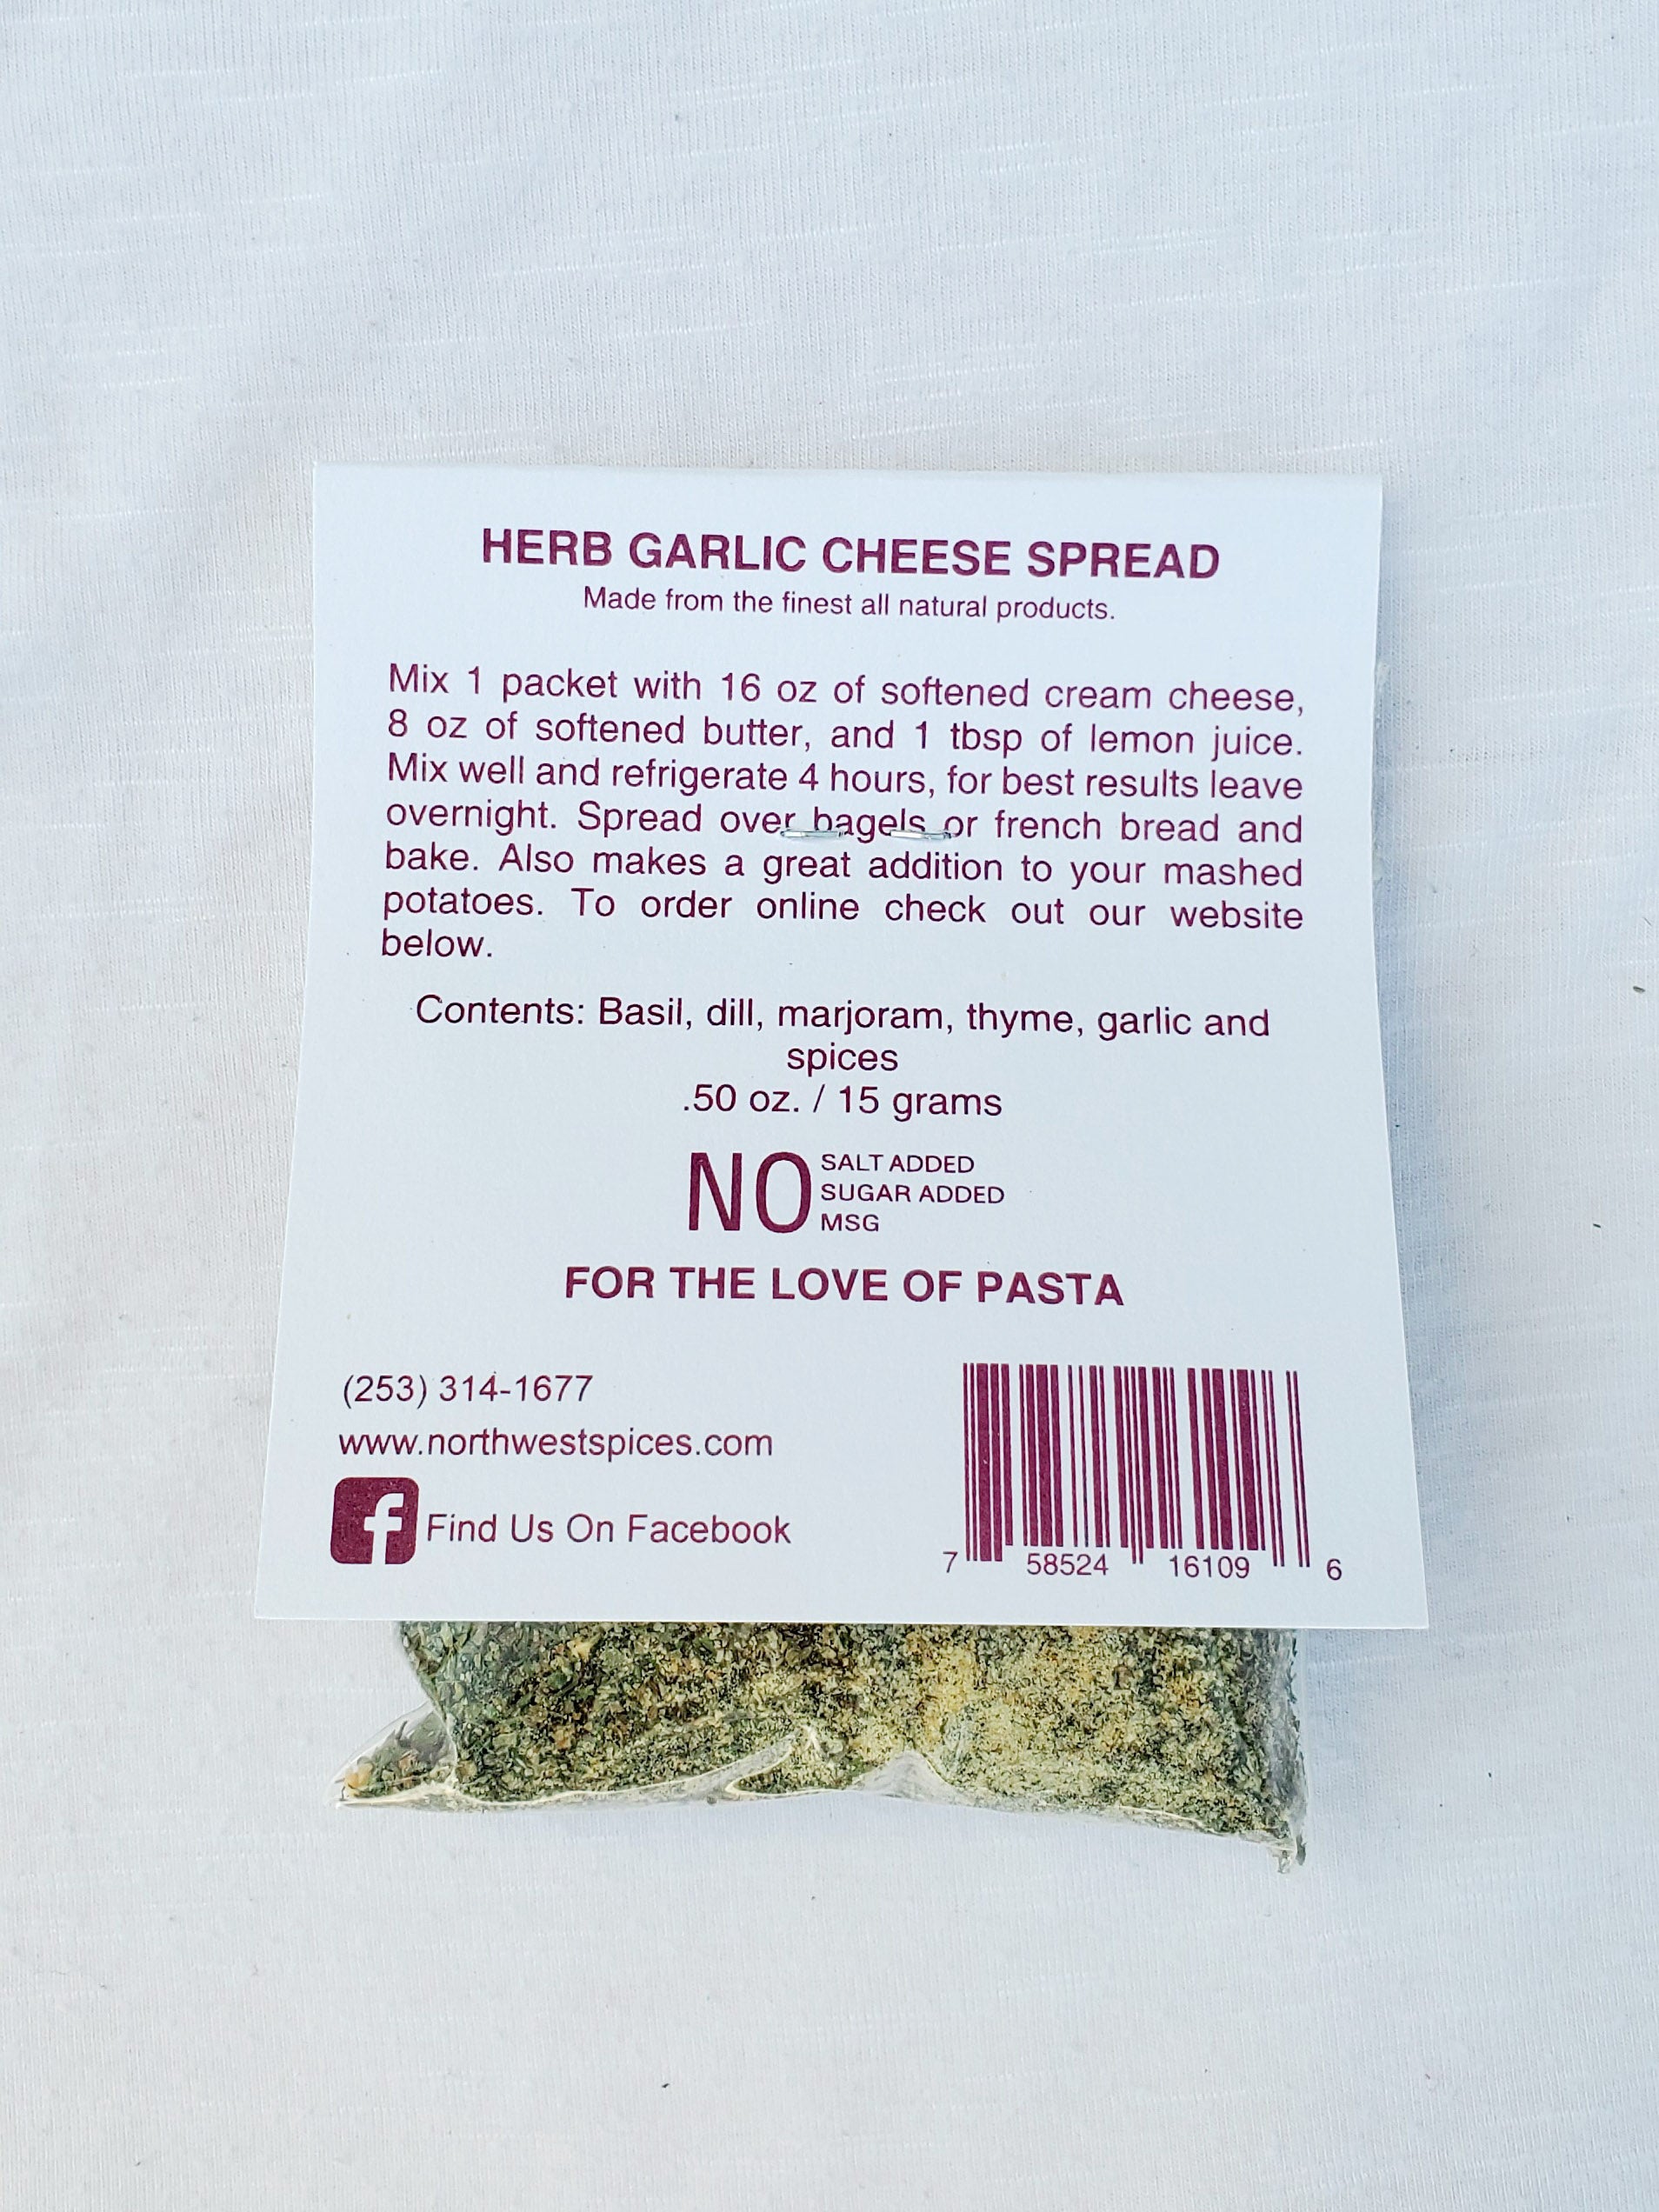 Herb Garlic Cheese Seasoning Blend by Northwest Spices contains, Basil , Dill, Marjoram, Thyme, Garlic and spices.